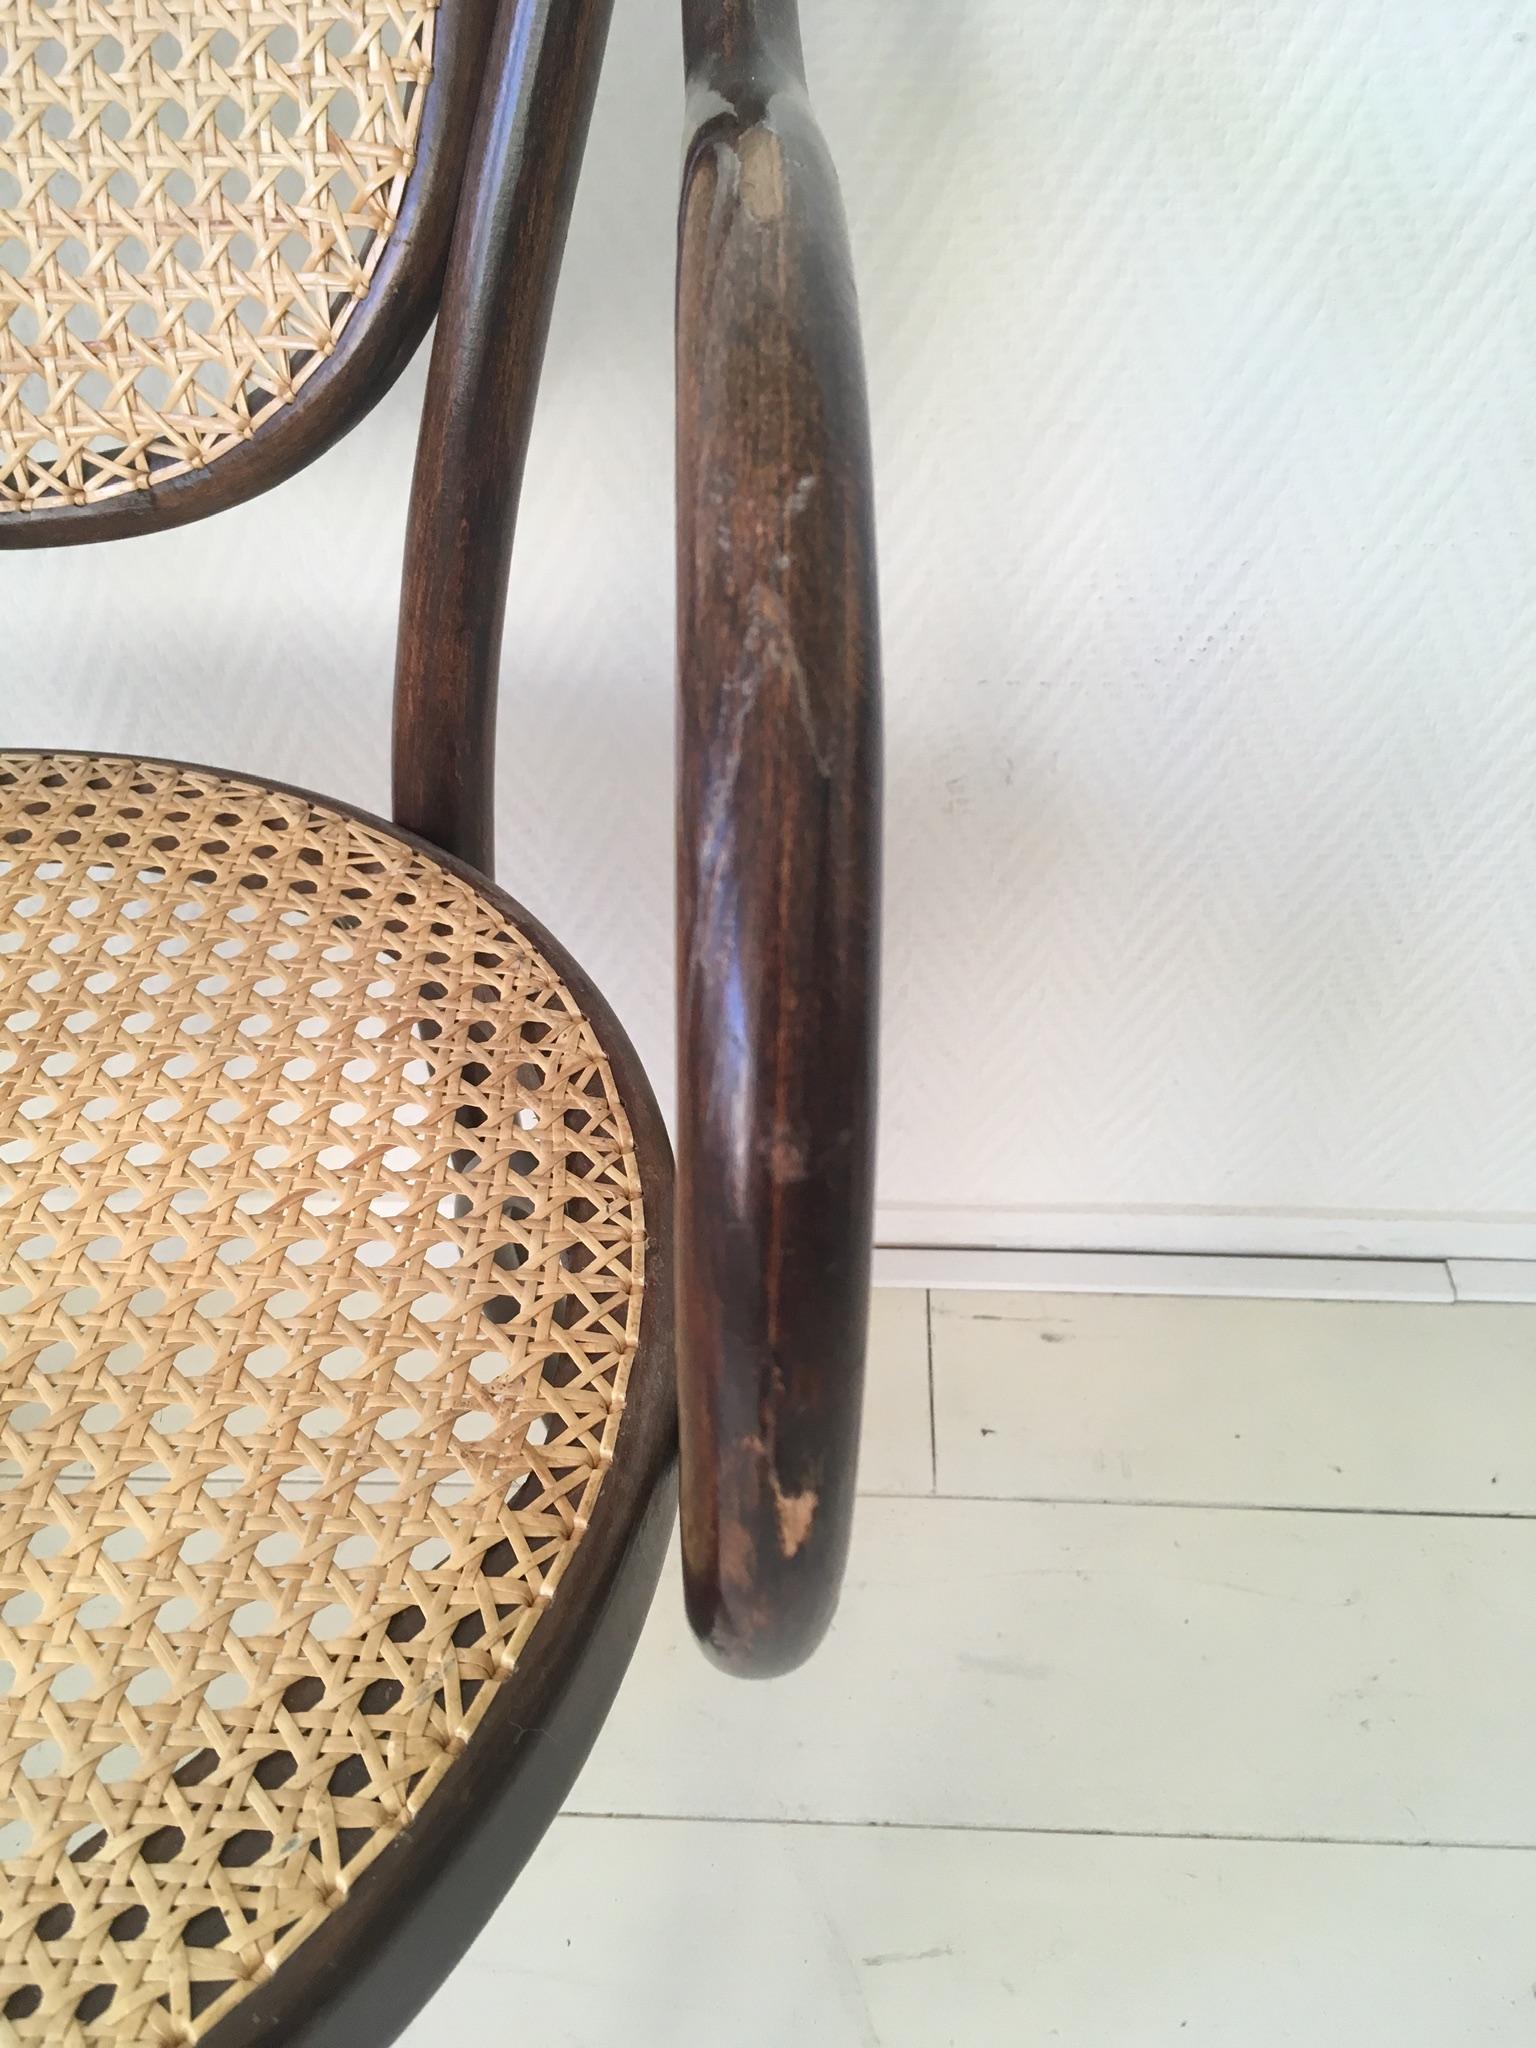 ZPM Radomsko, Former Thonet, No. 11 Bentwood and Rattan Dining Room Chairs 5